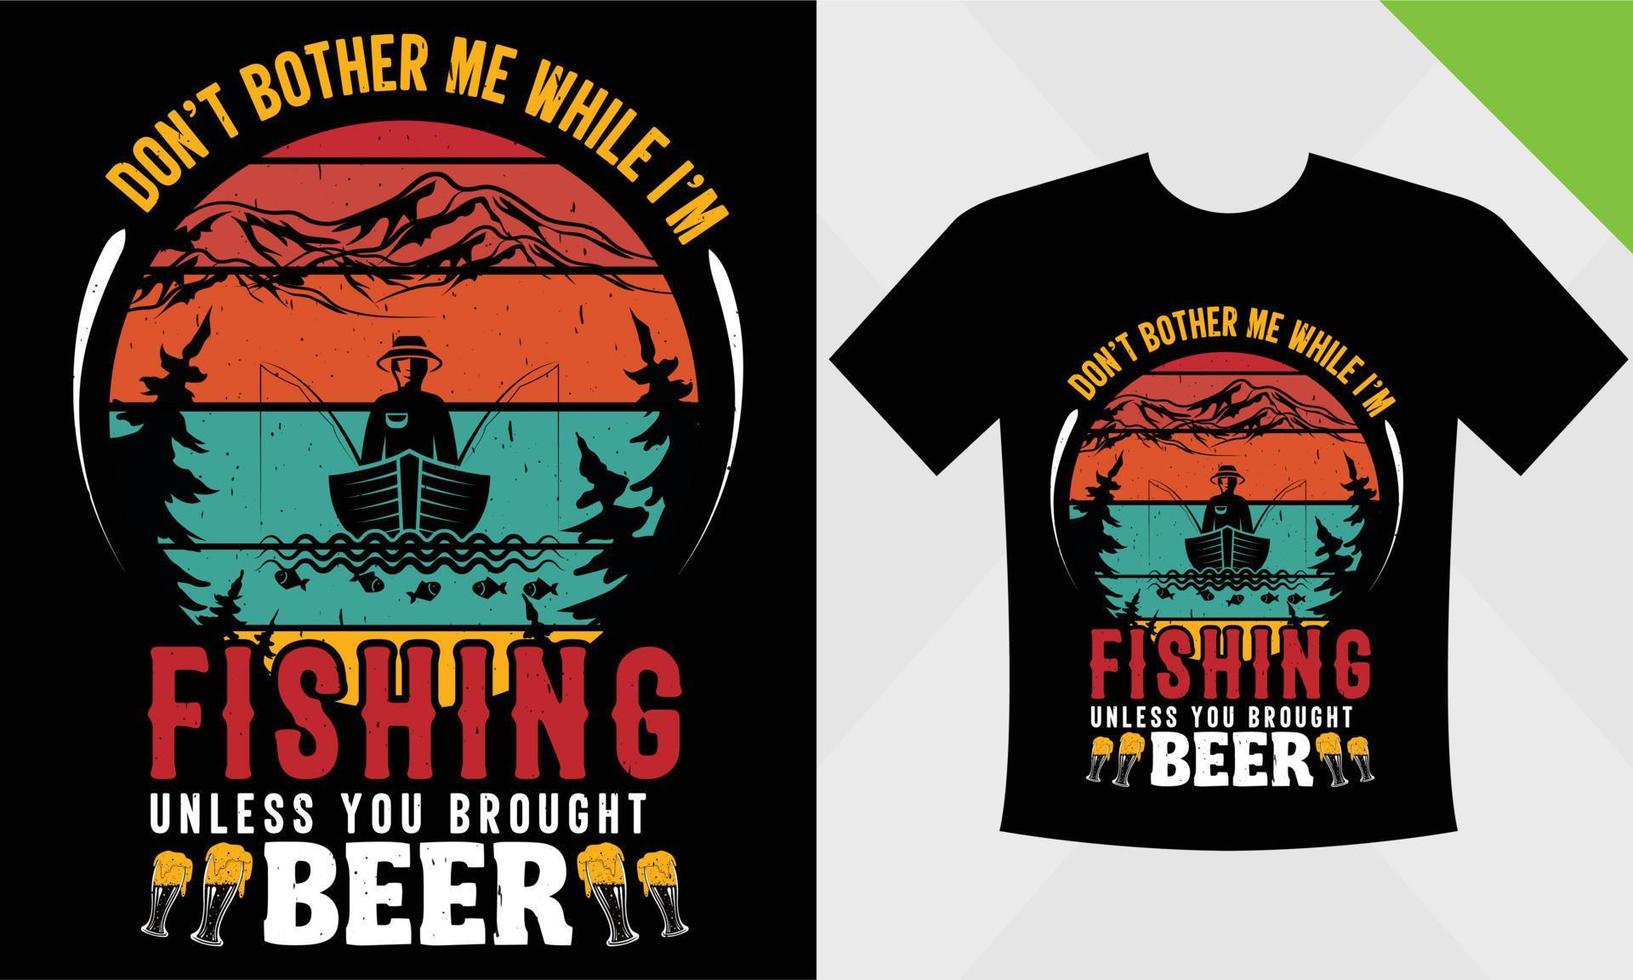 Don't Brother me while I'm fishing unless you brought beer vector